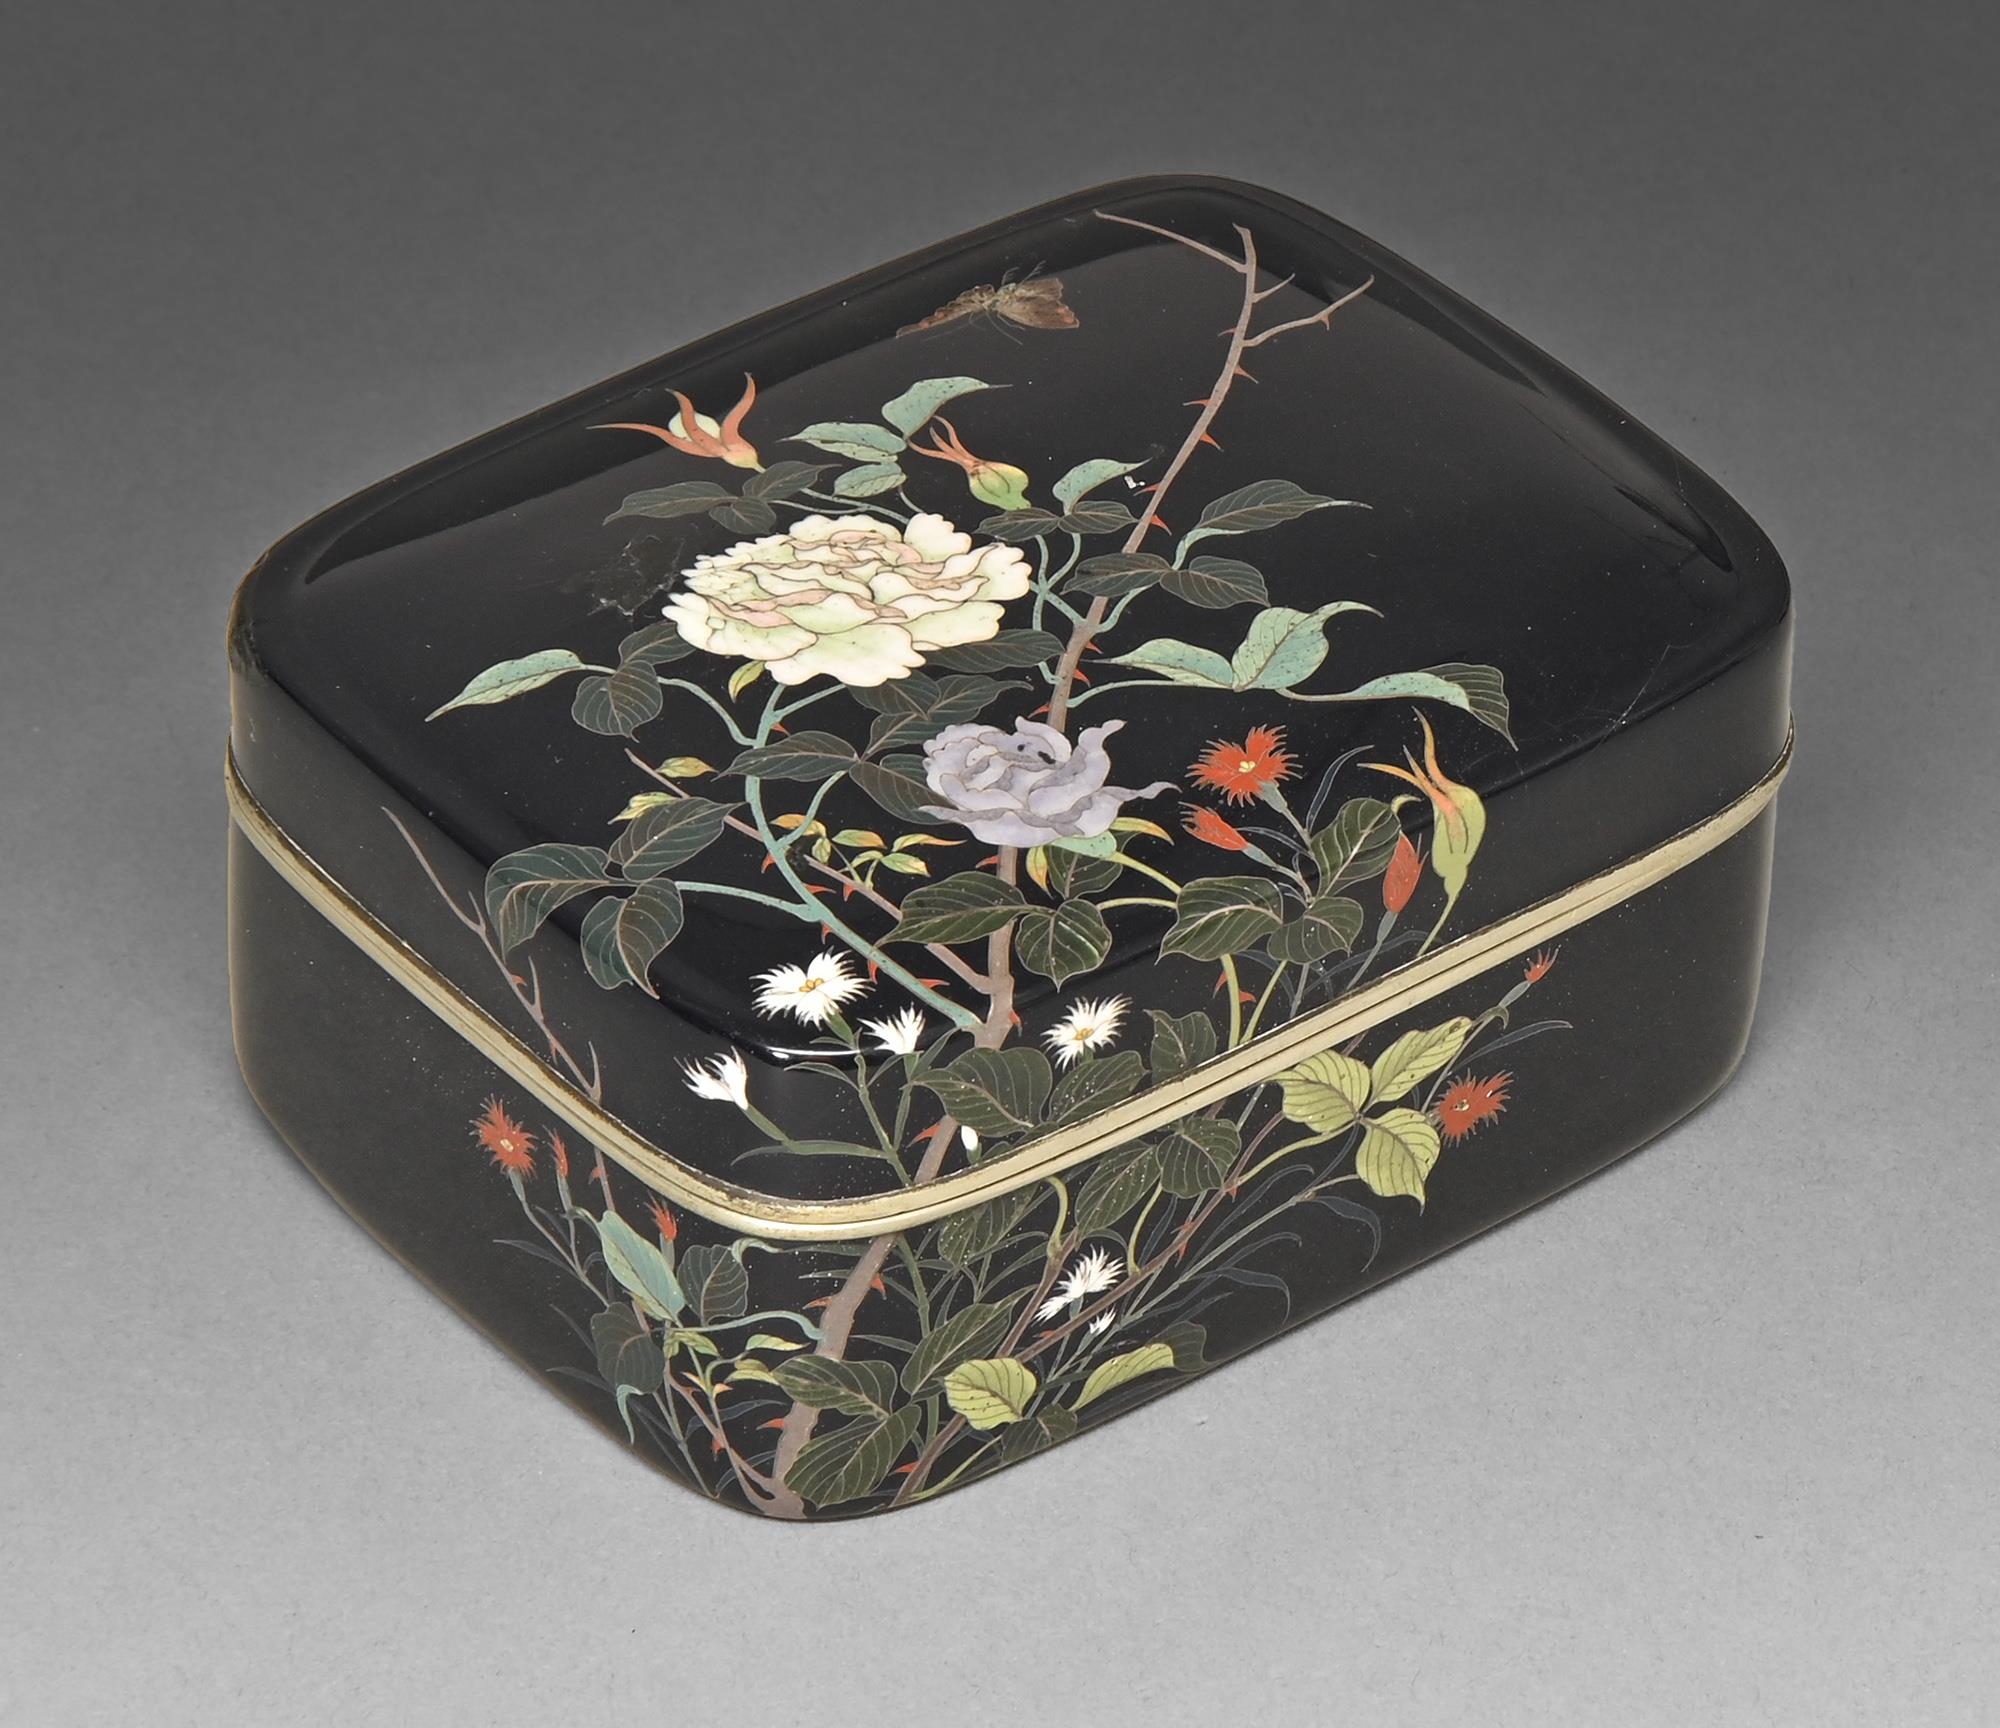 A Japanese cloisonne enamel box and cover, Meiji period, enamelled in silver cloisons with